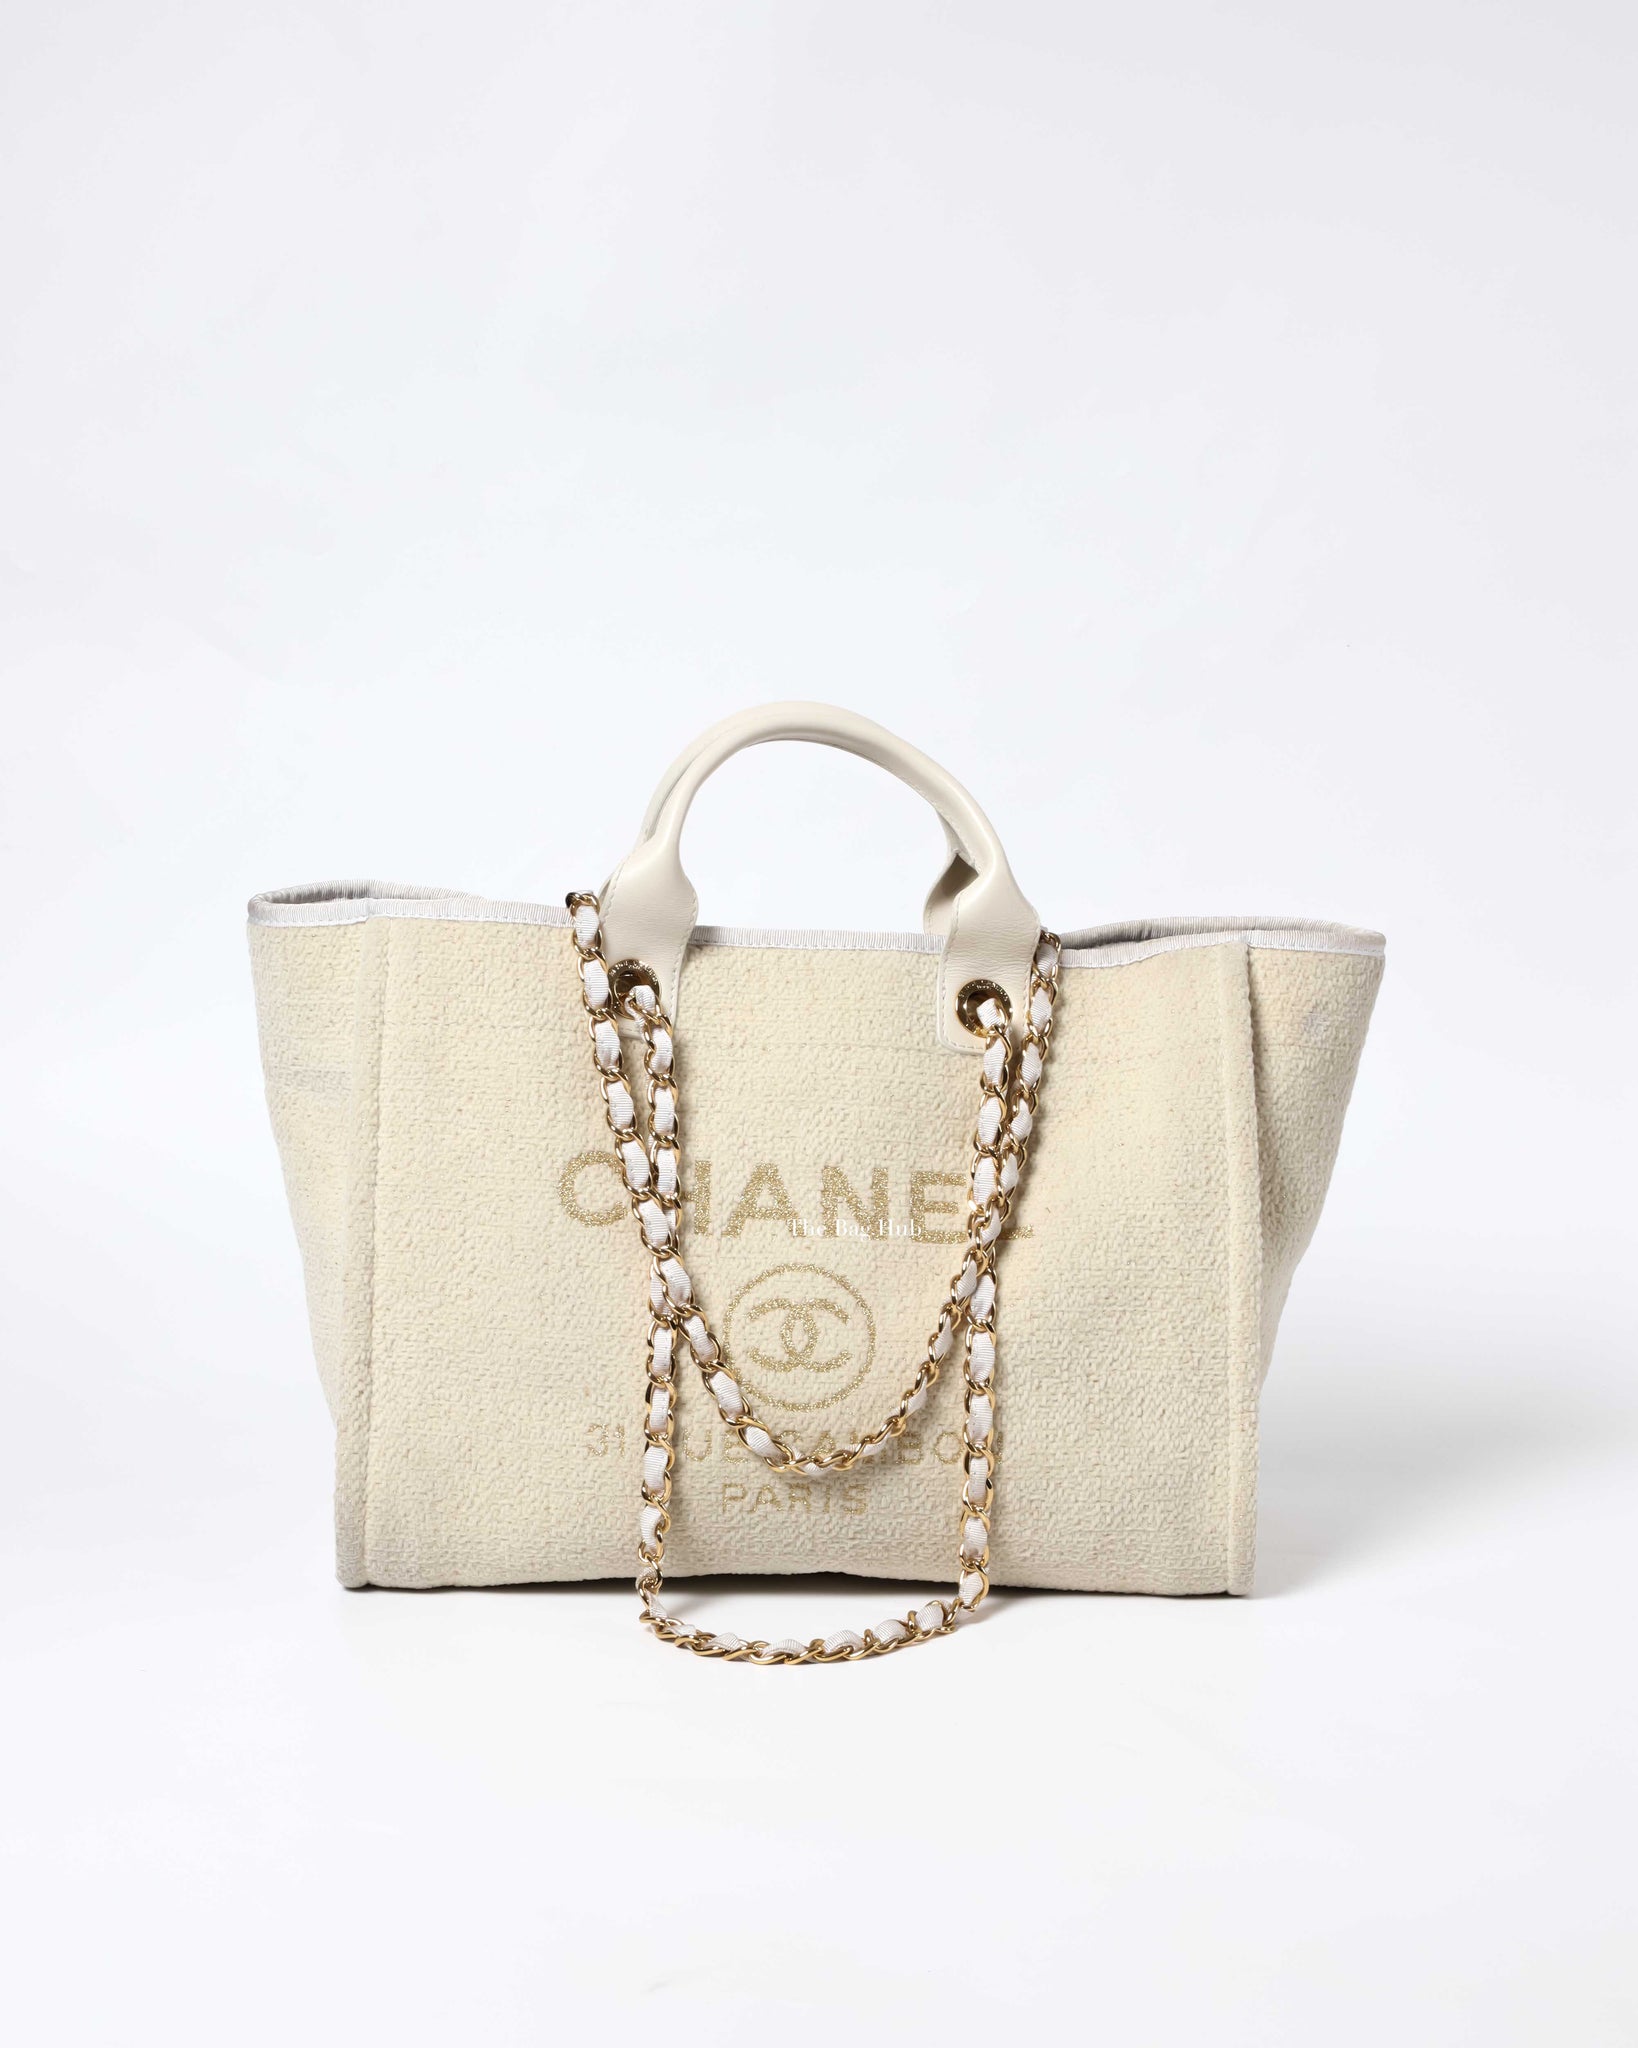 Chanel White/Gold Tweed Deauville Tote Bag Ghw | Designer Brand | Authentic  Chanel | The Bag Hub